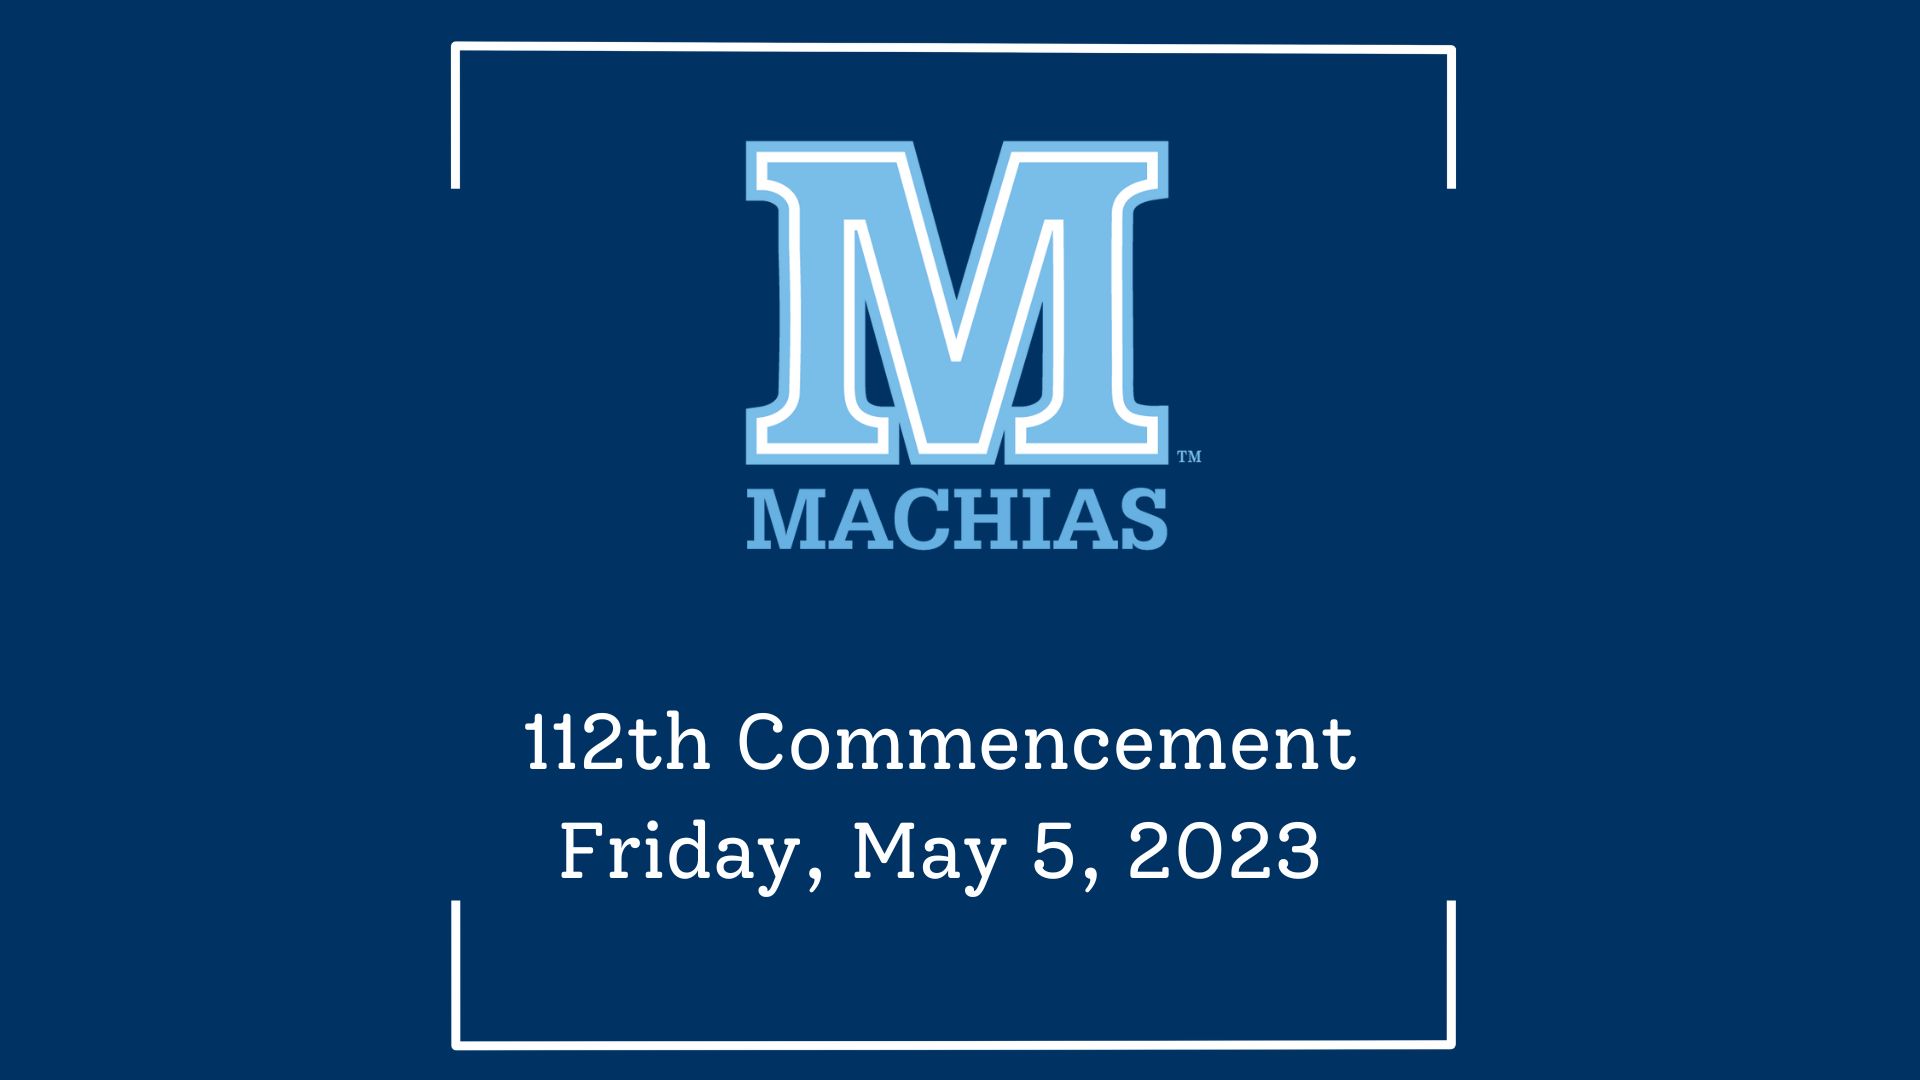 Dark blue background with the light blue "M" logo with Machias written underneath. Write letters say "112th Commencemnt Friday, May 5, 2023